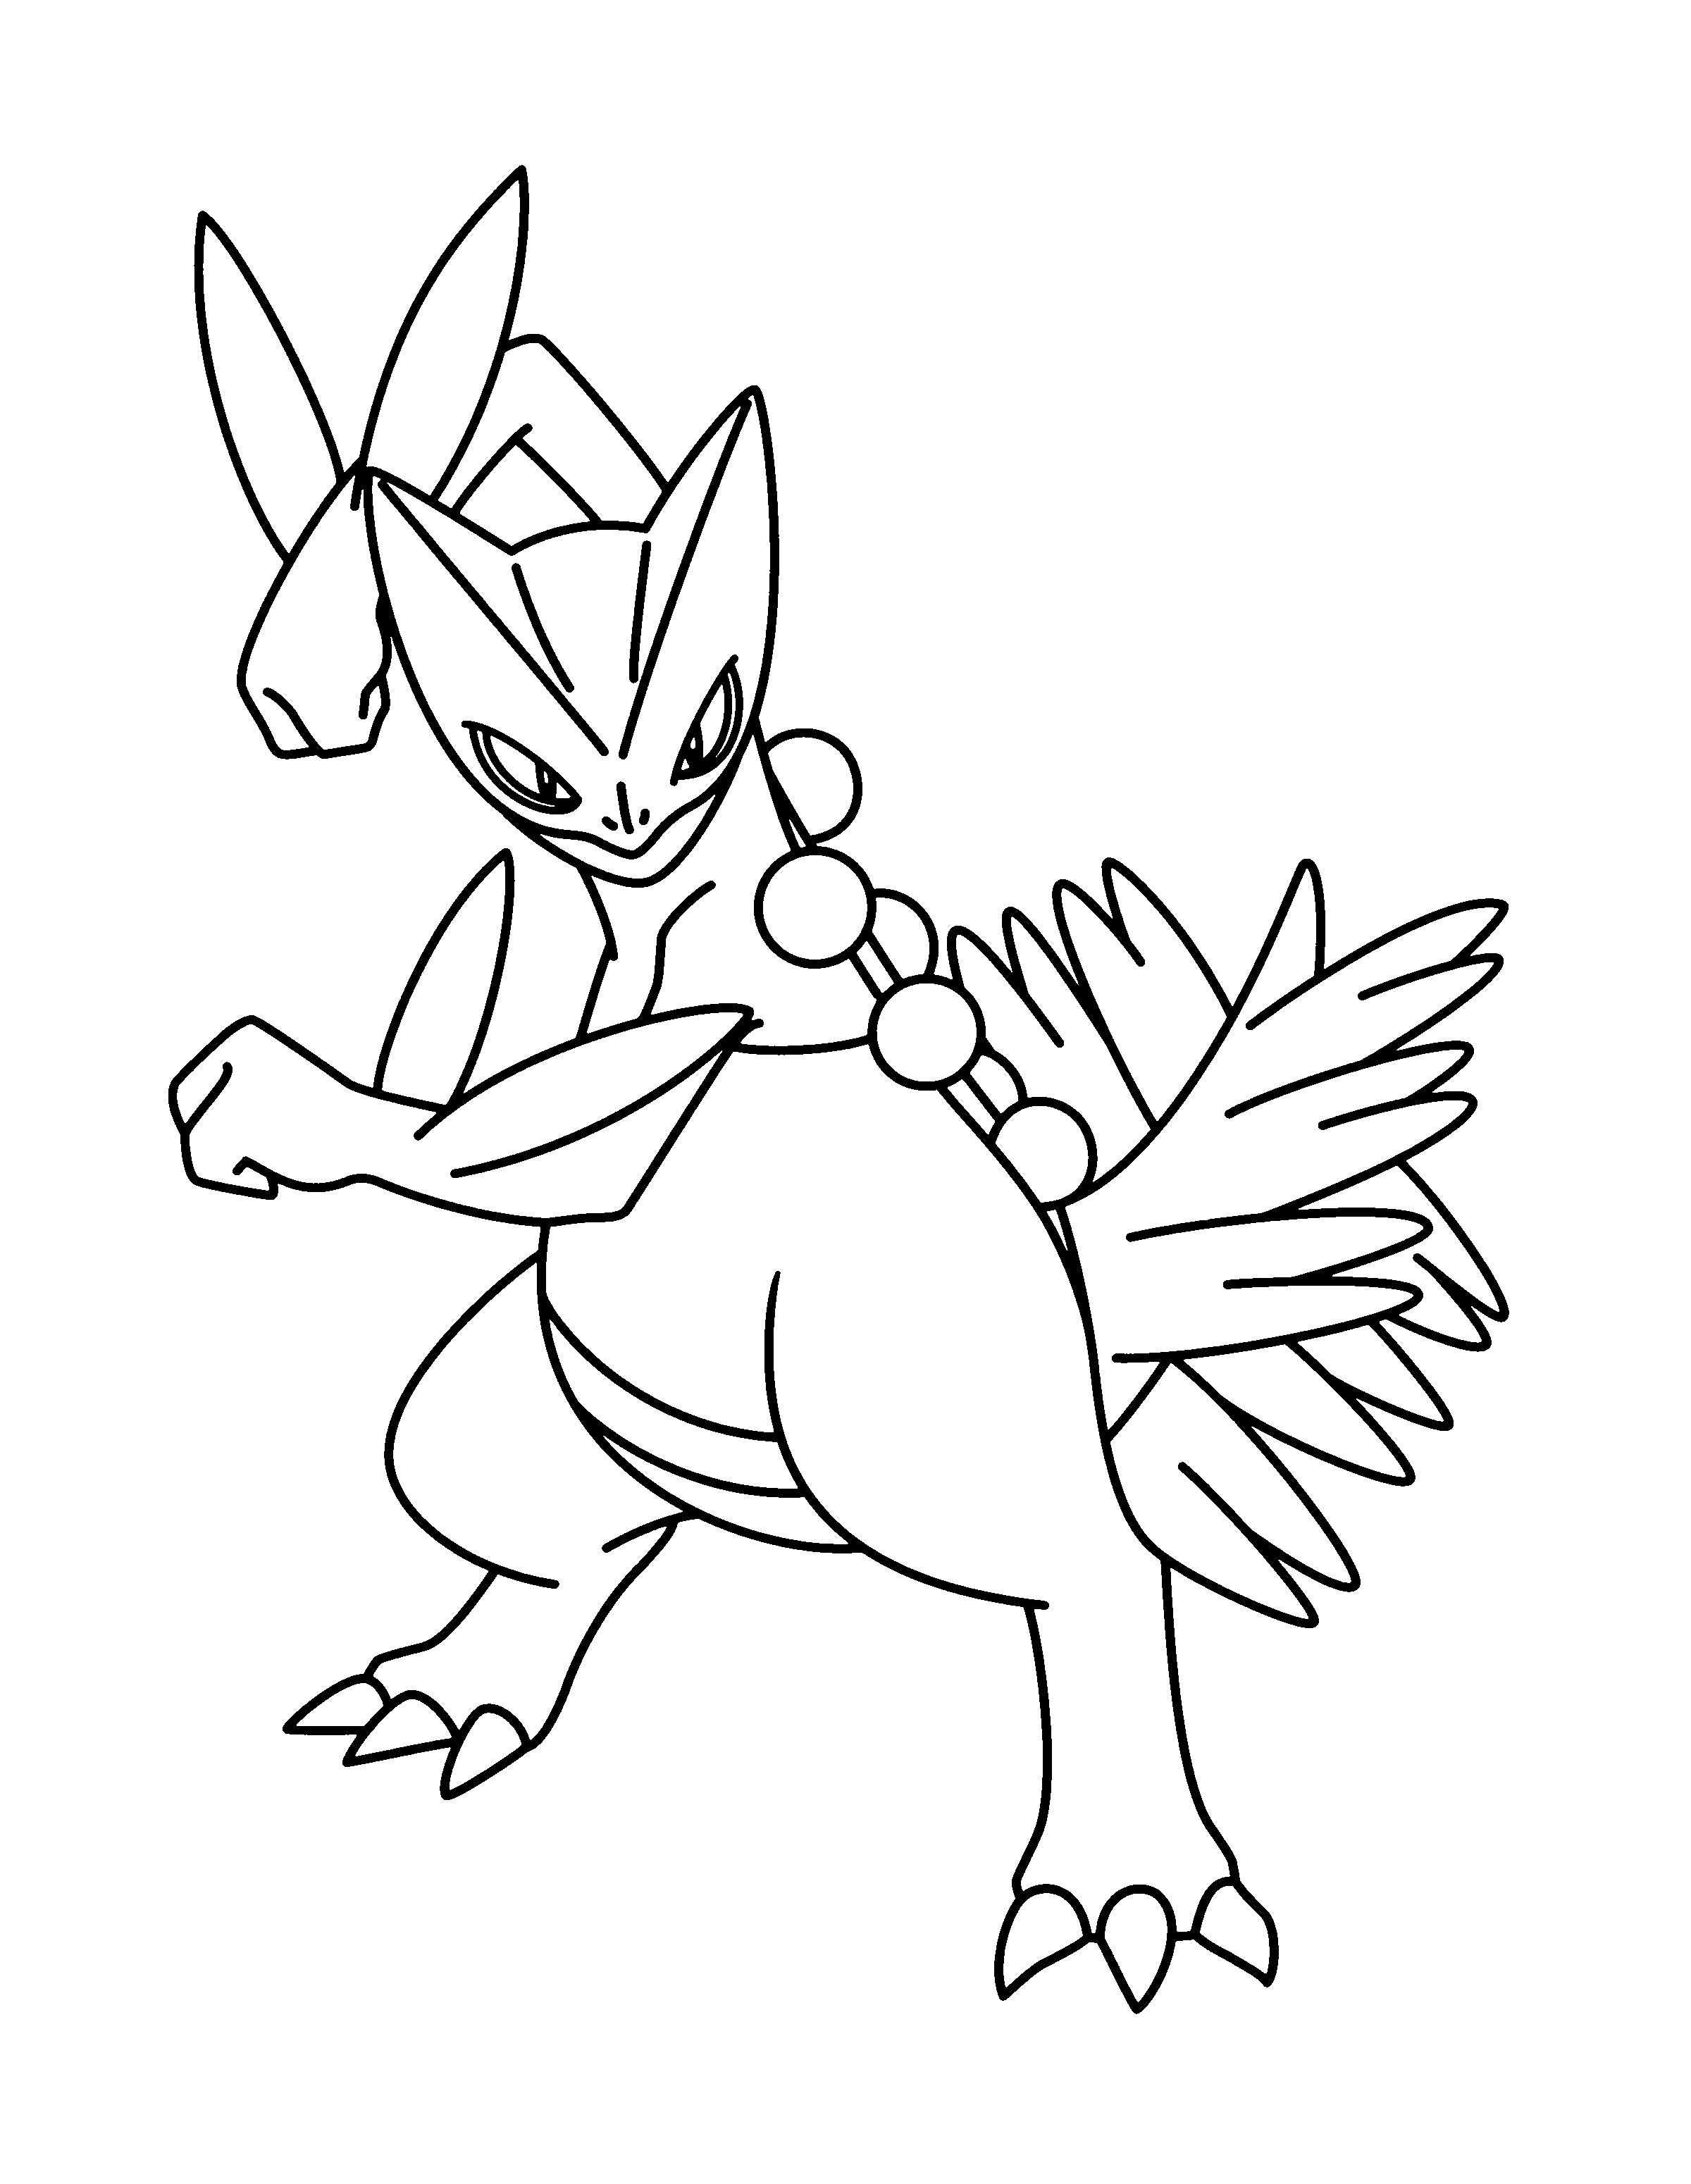 Pokemon swampert coloring pages download and print for free